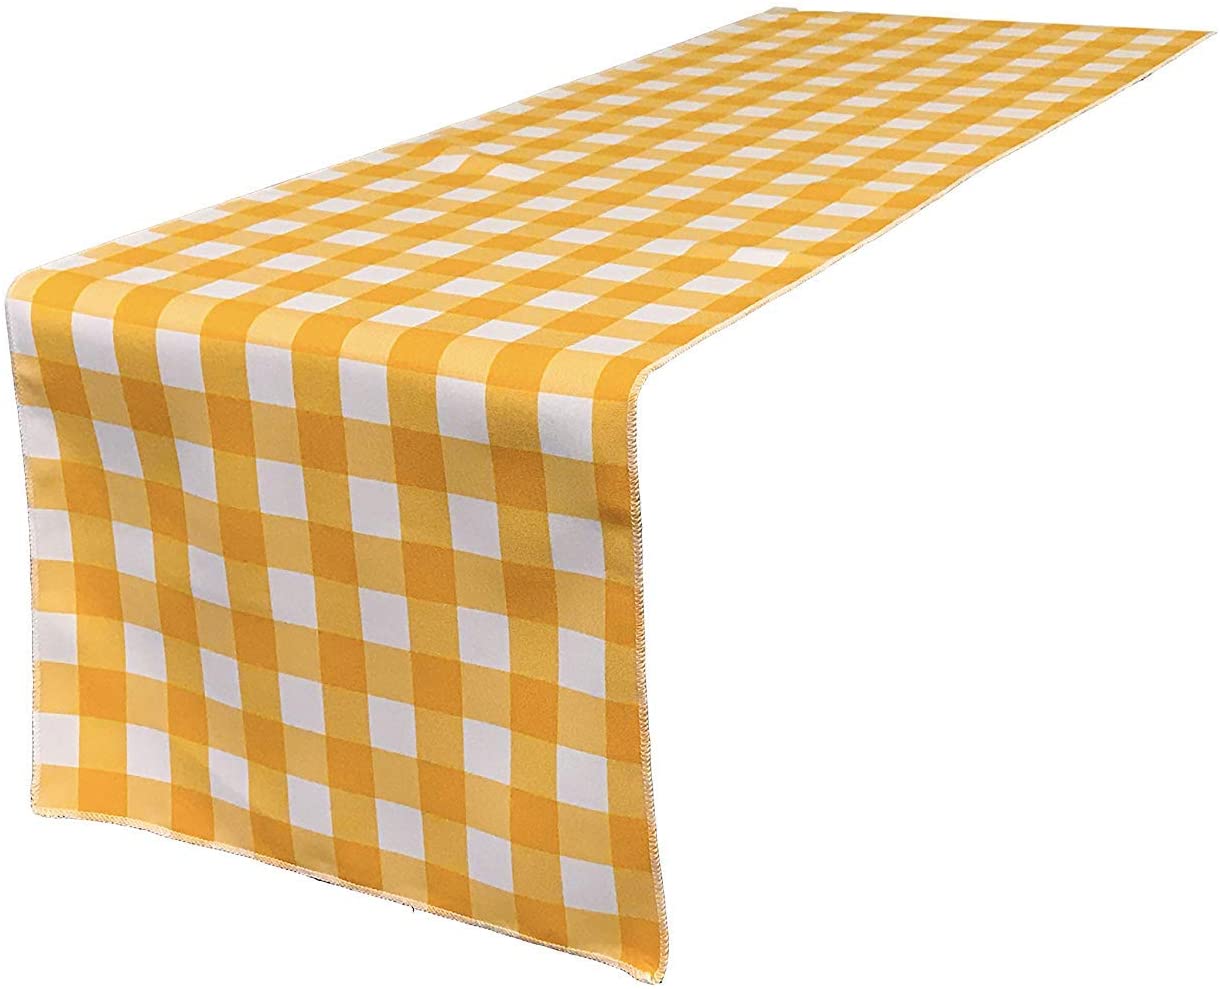 12" Wide by The Size of Your Choice, Polyester Poplin Gingham, Checkered, Plaid Table Runner (White & Dark Yellow,